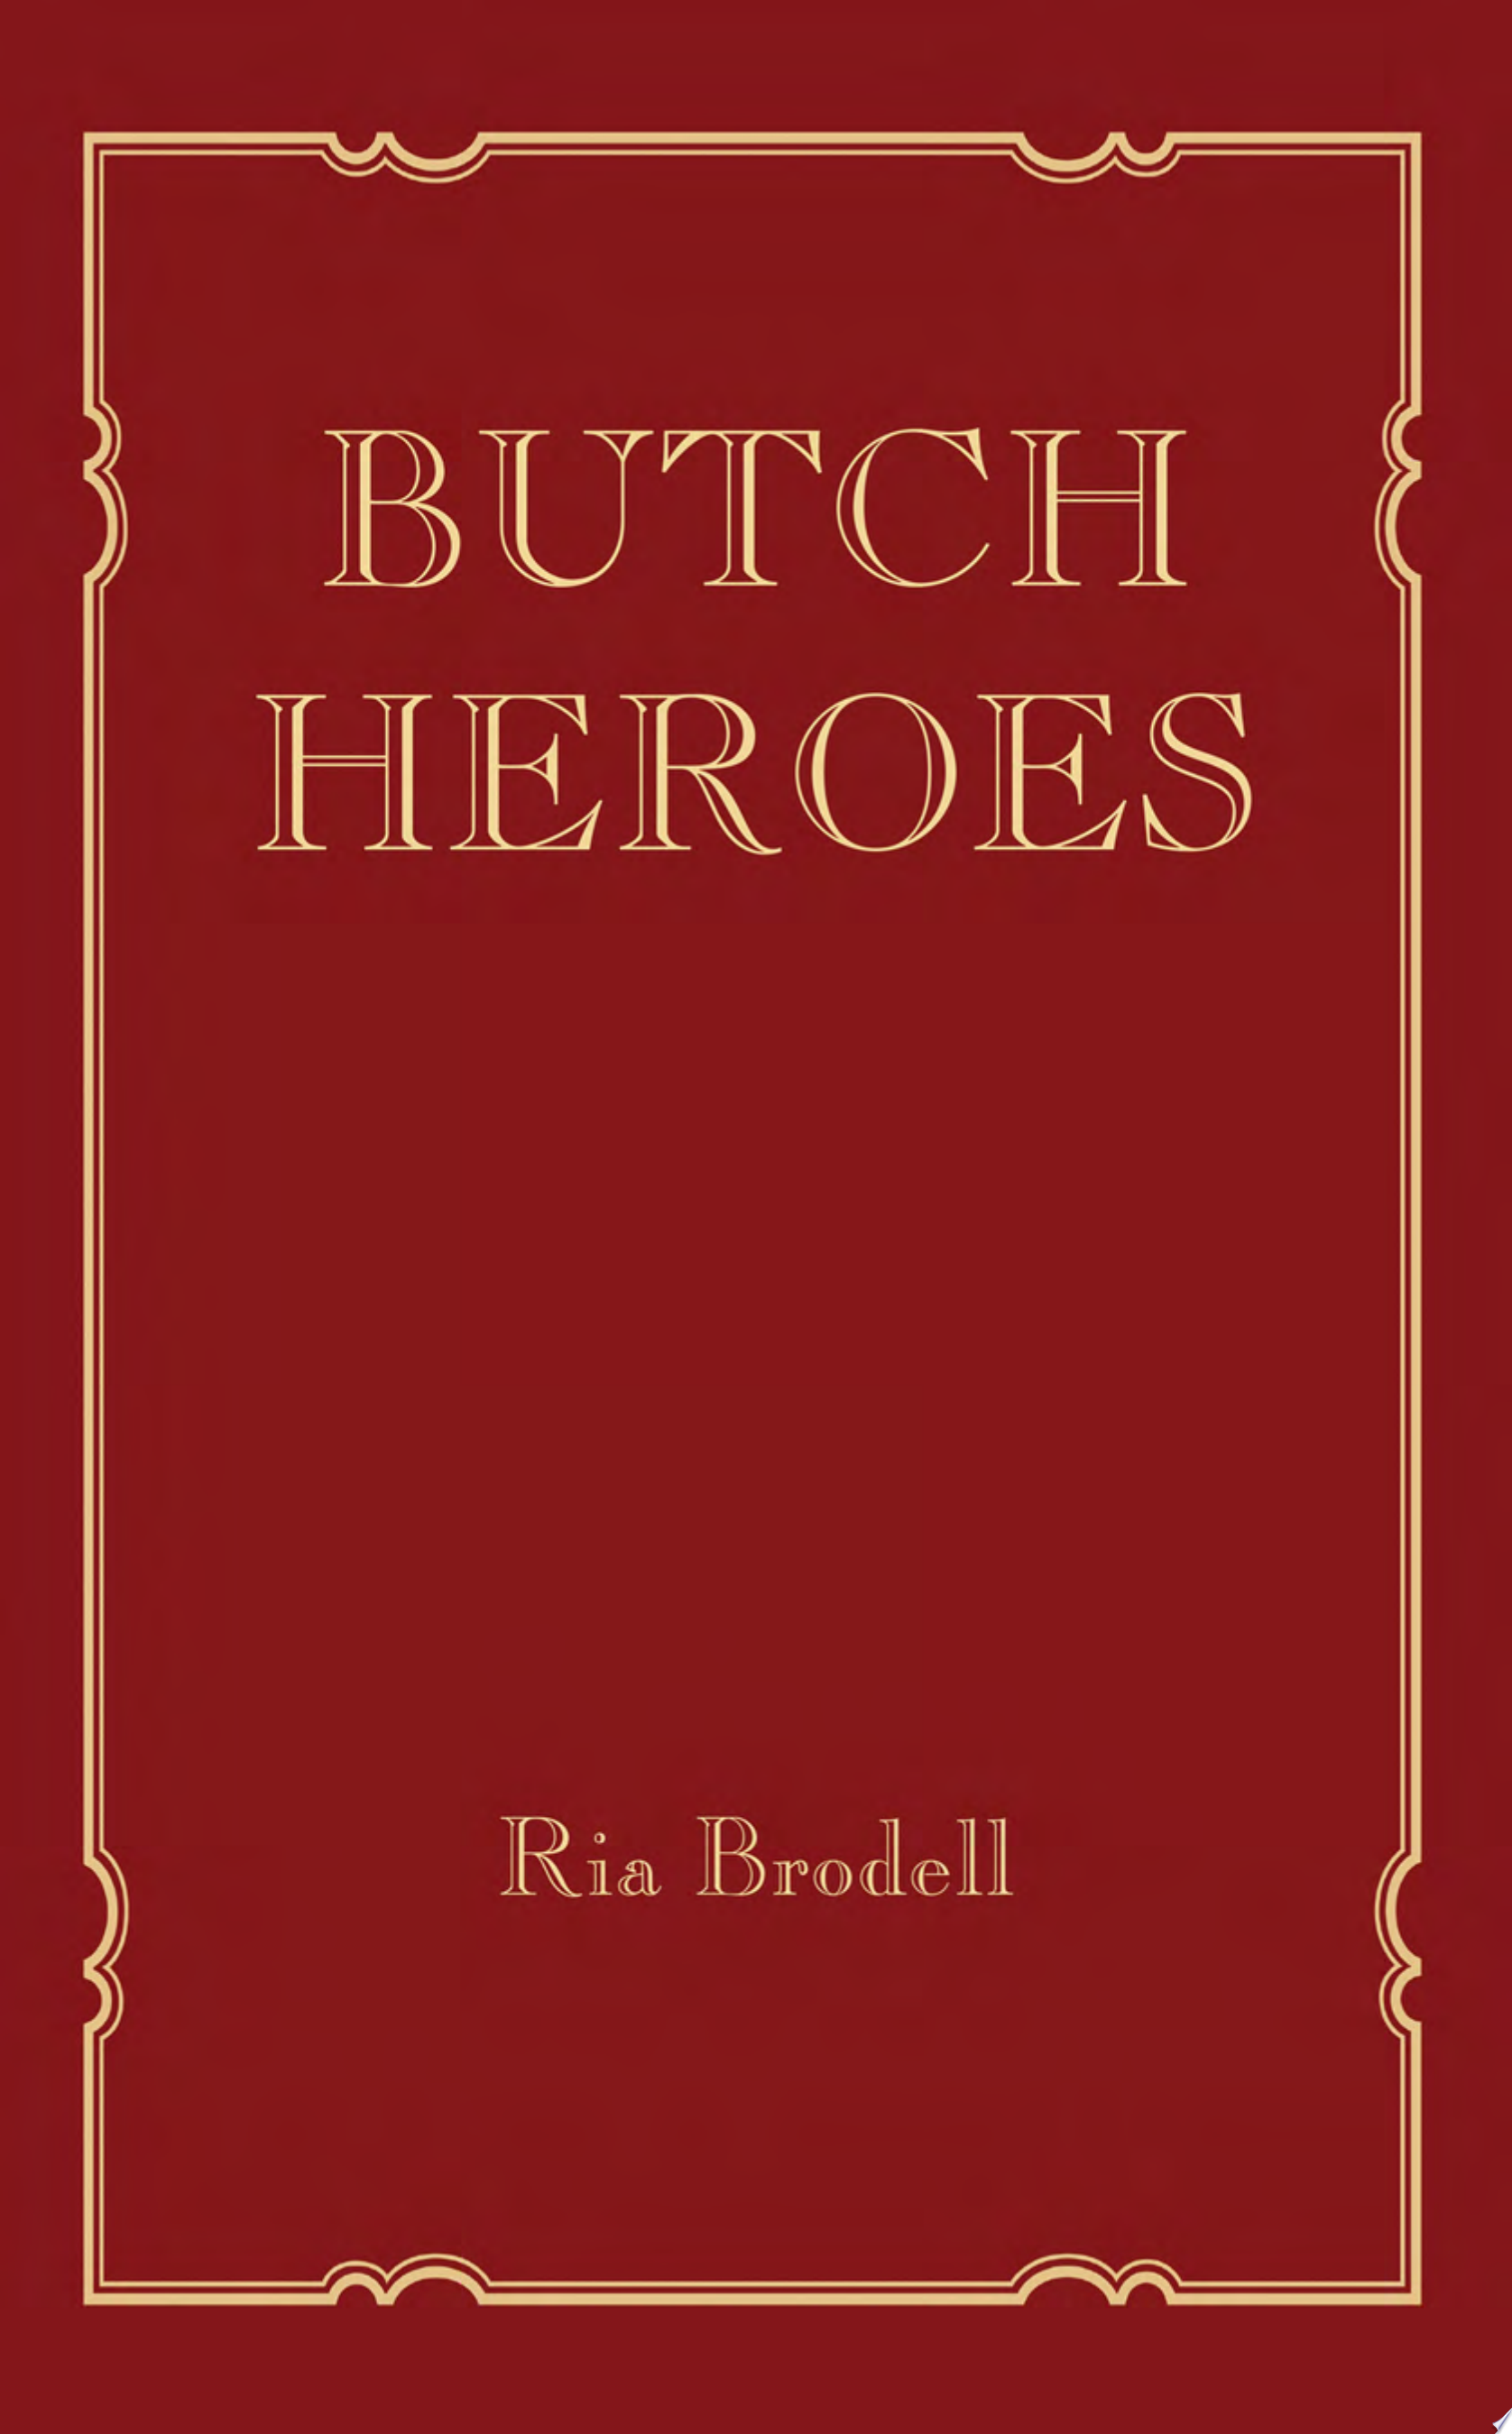 Image for "Butch Heroes"